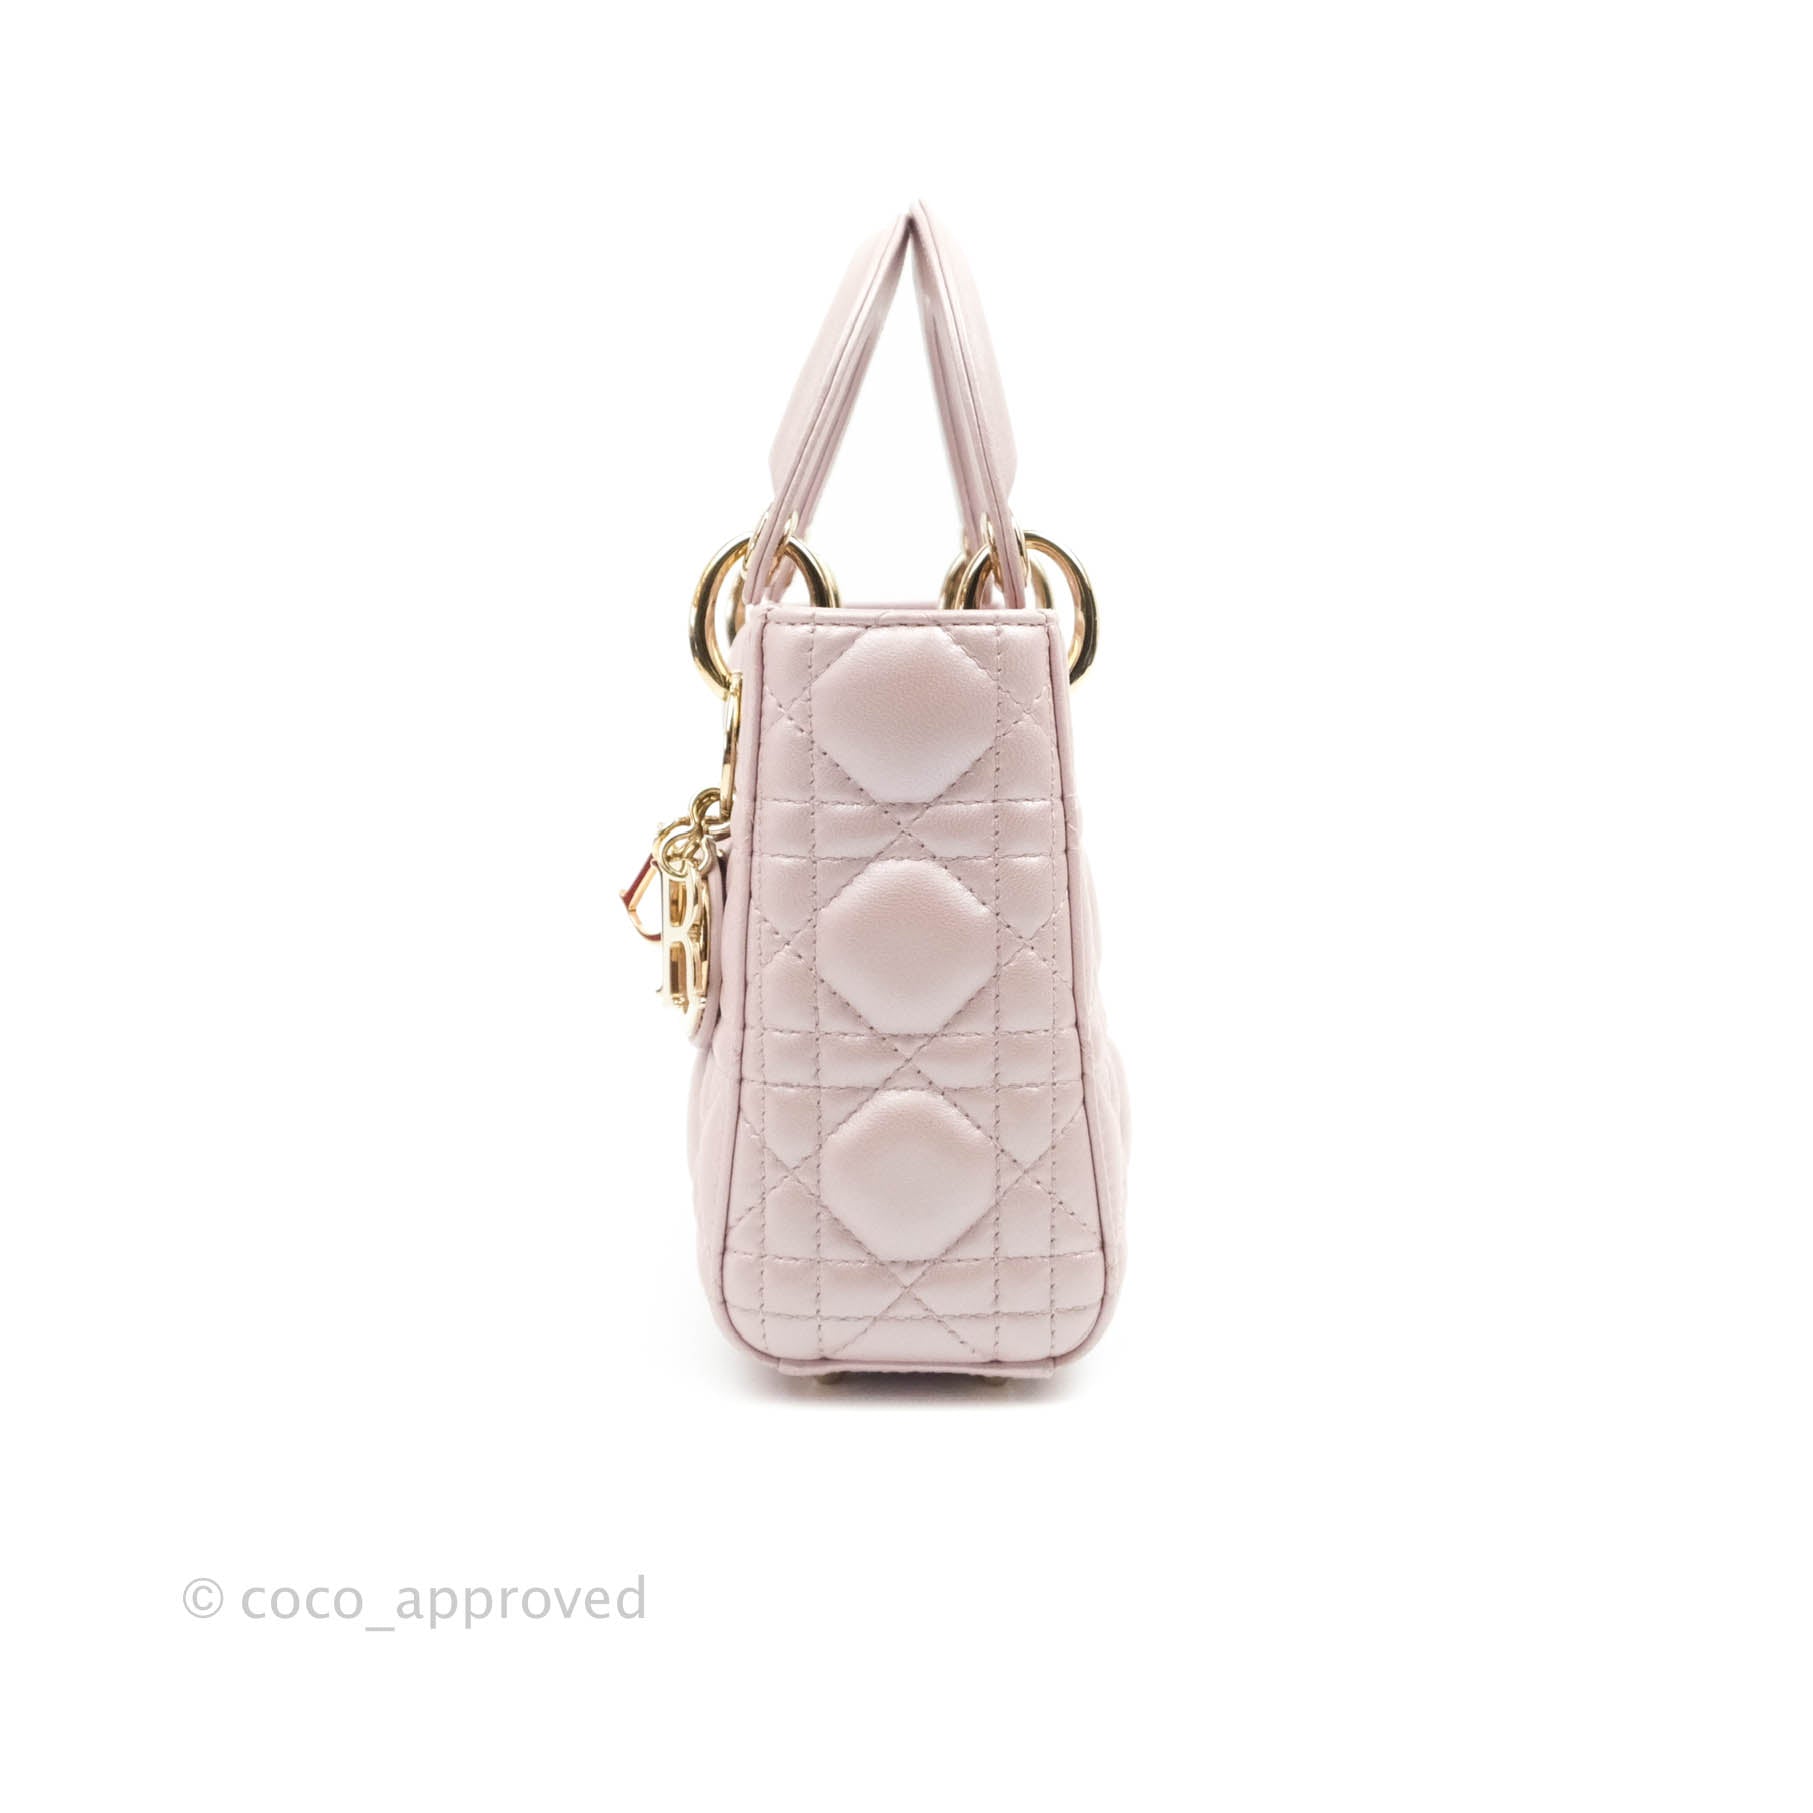 Dior's Lady Dior In Pearl Cannage Is Pure Elegance - BAGAHOLICBOY